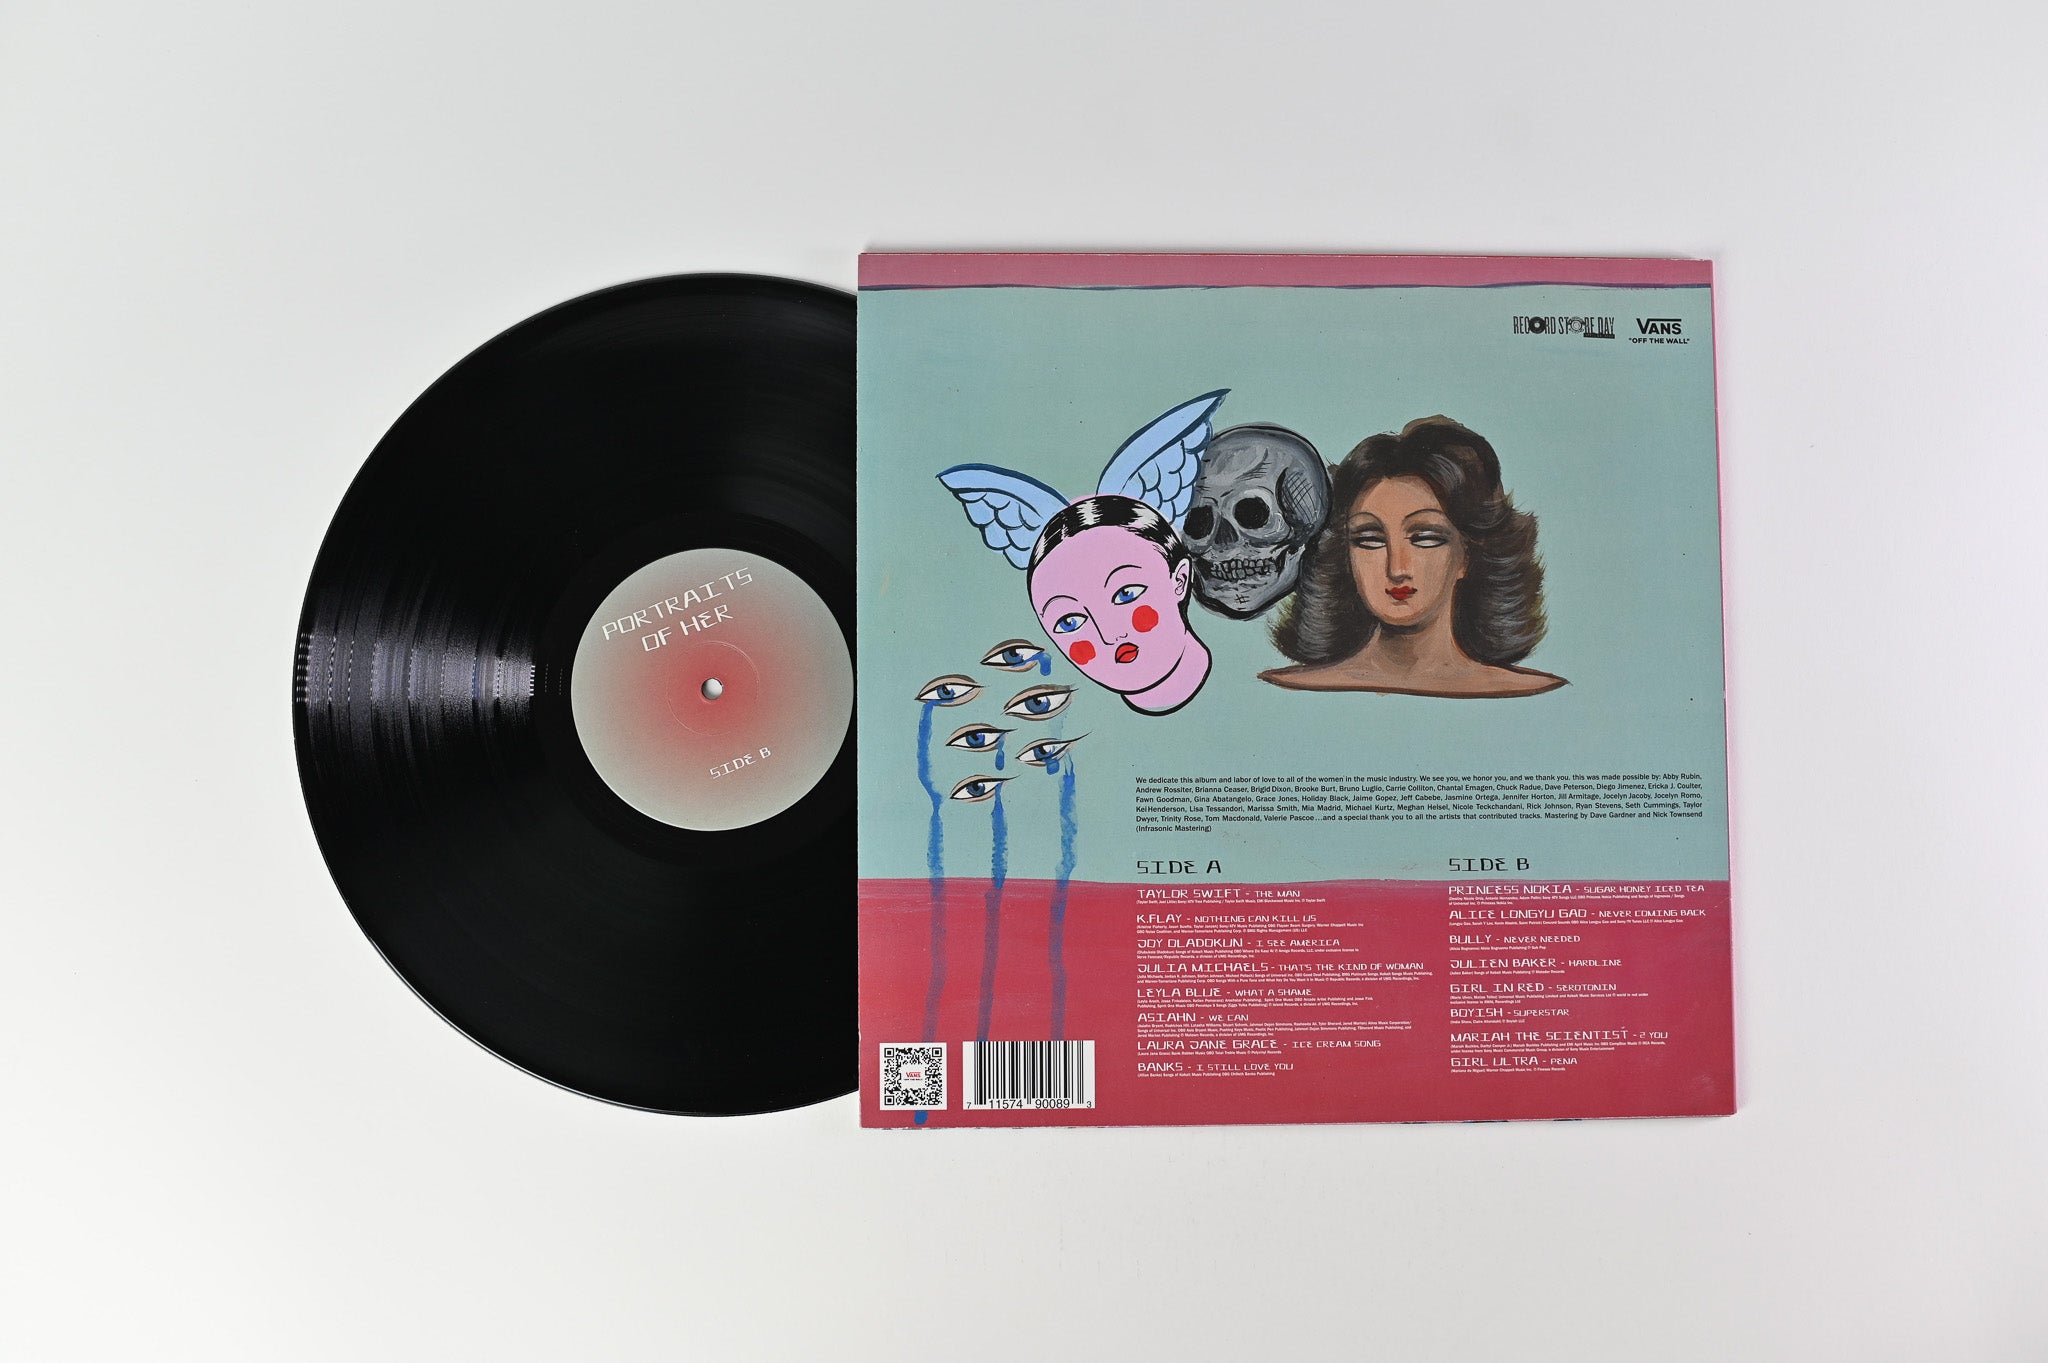 Various - Portraits Of Her on Record Store Day Ltd RSD Vans Release